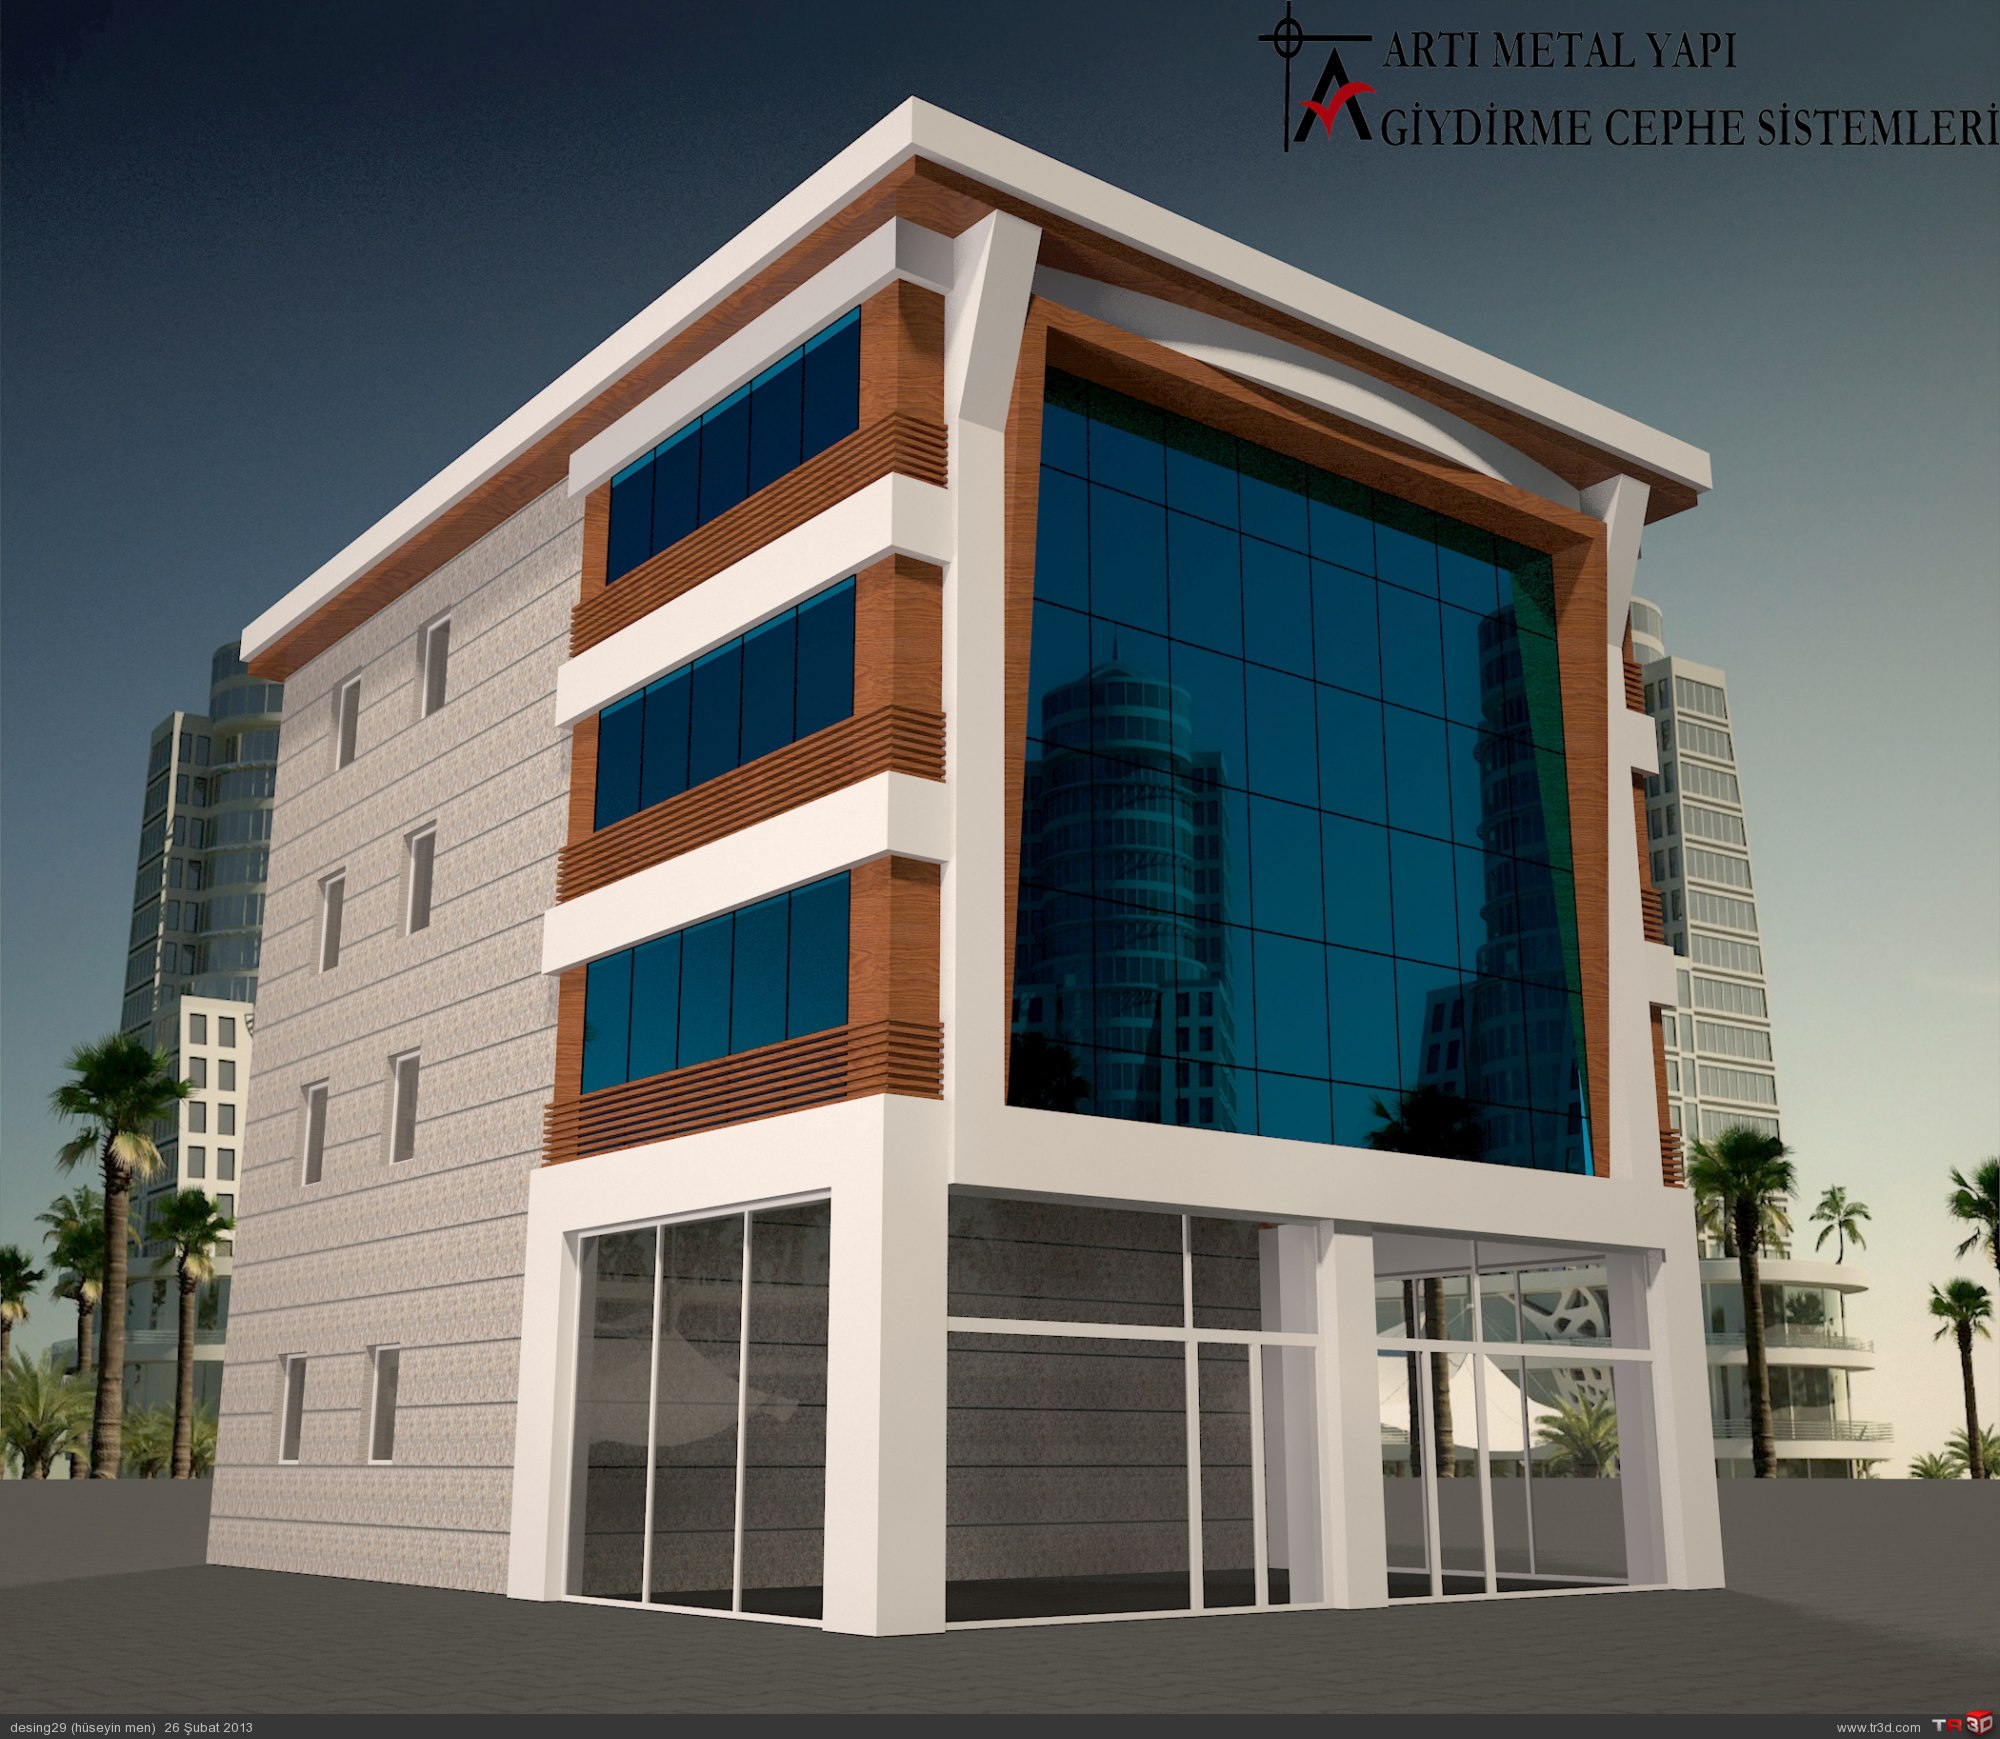 Download vray 3ds max 2014